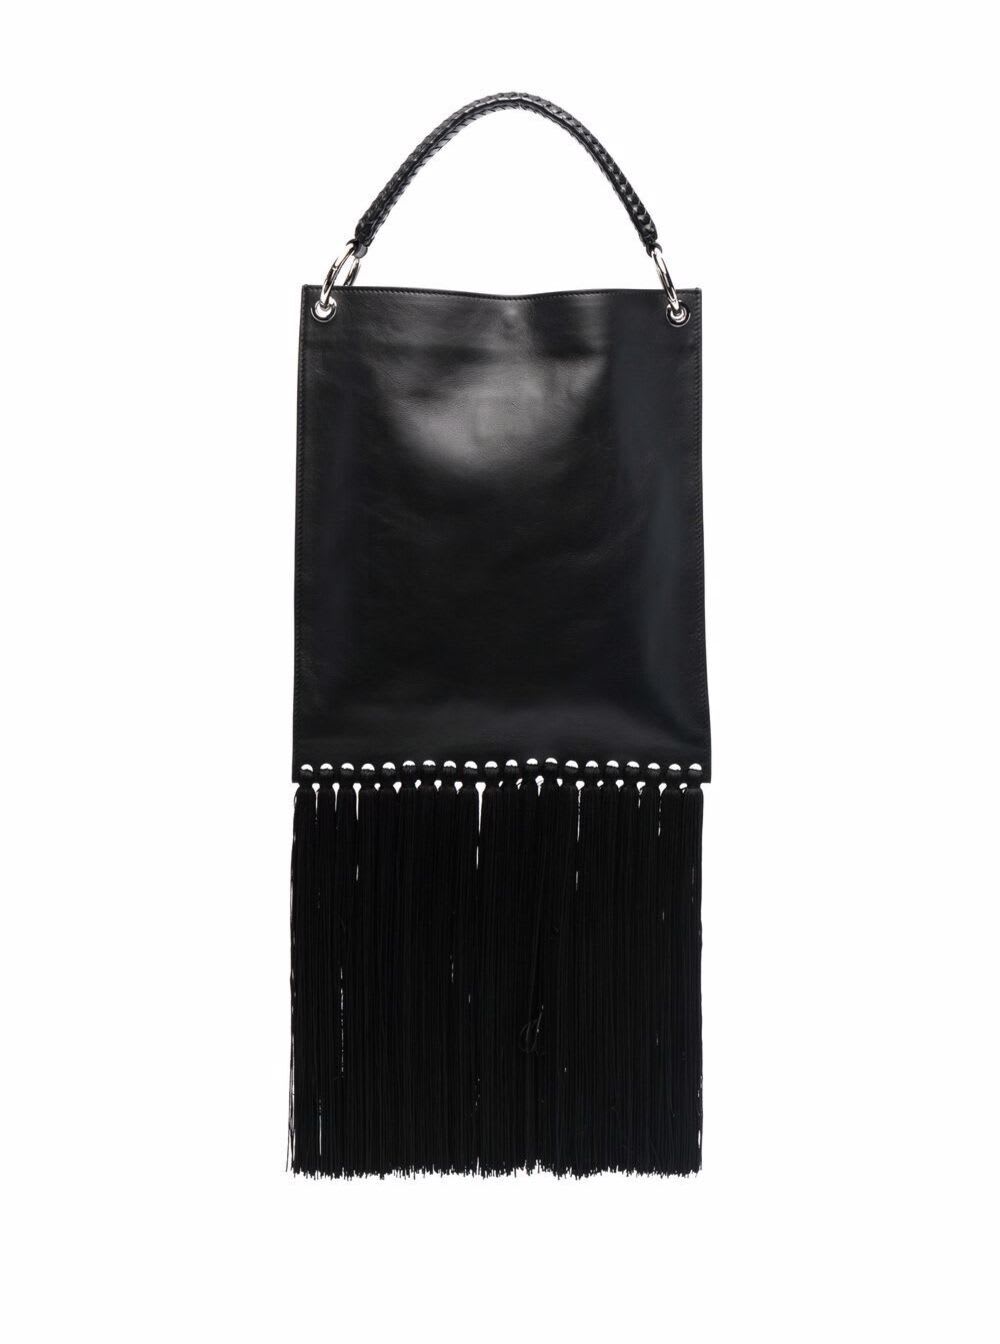 Etro Black Leather Tote Crossbody Bag With Fringes